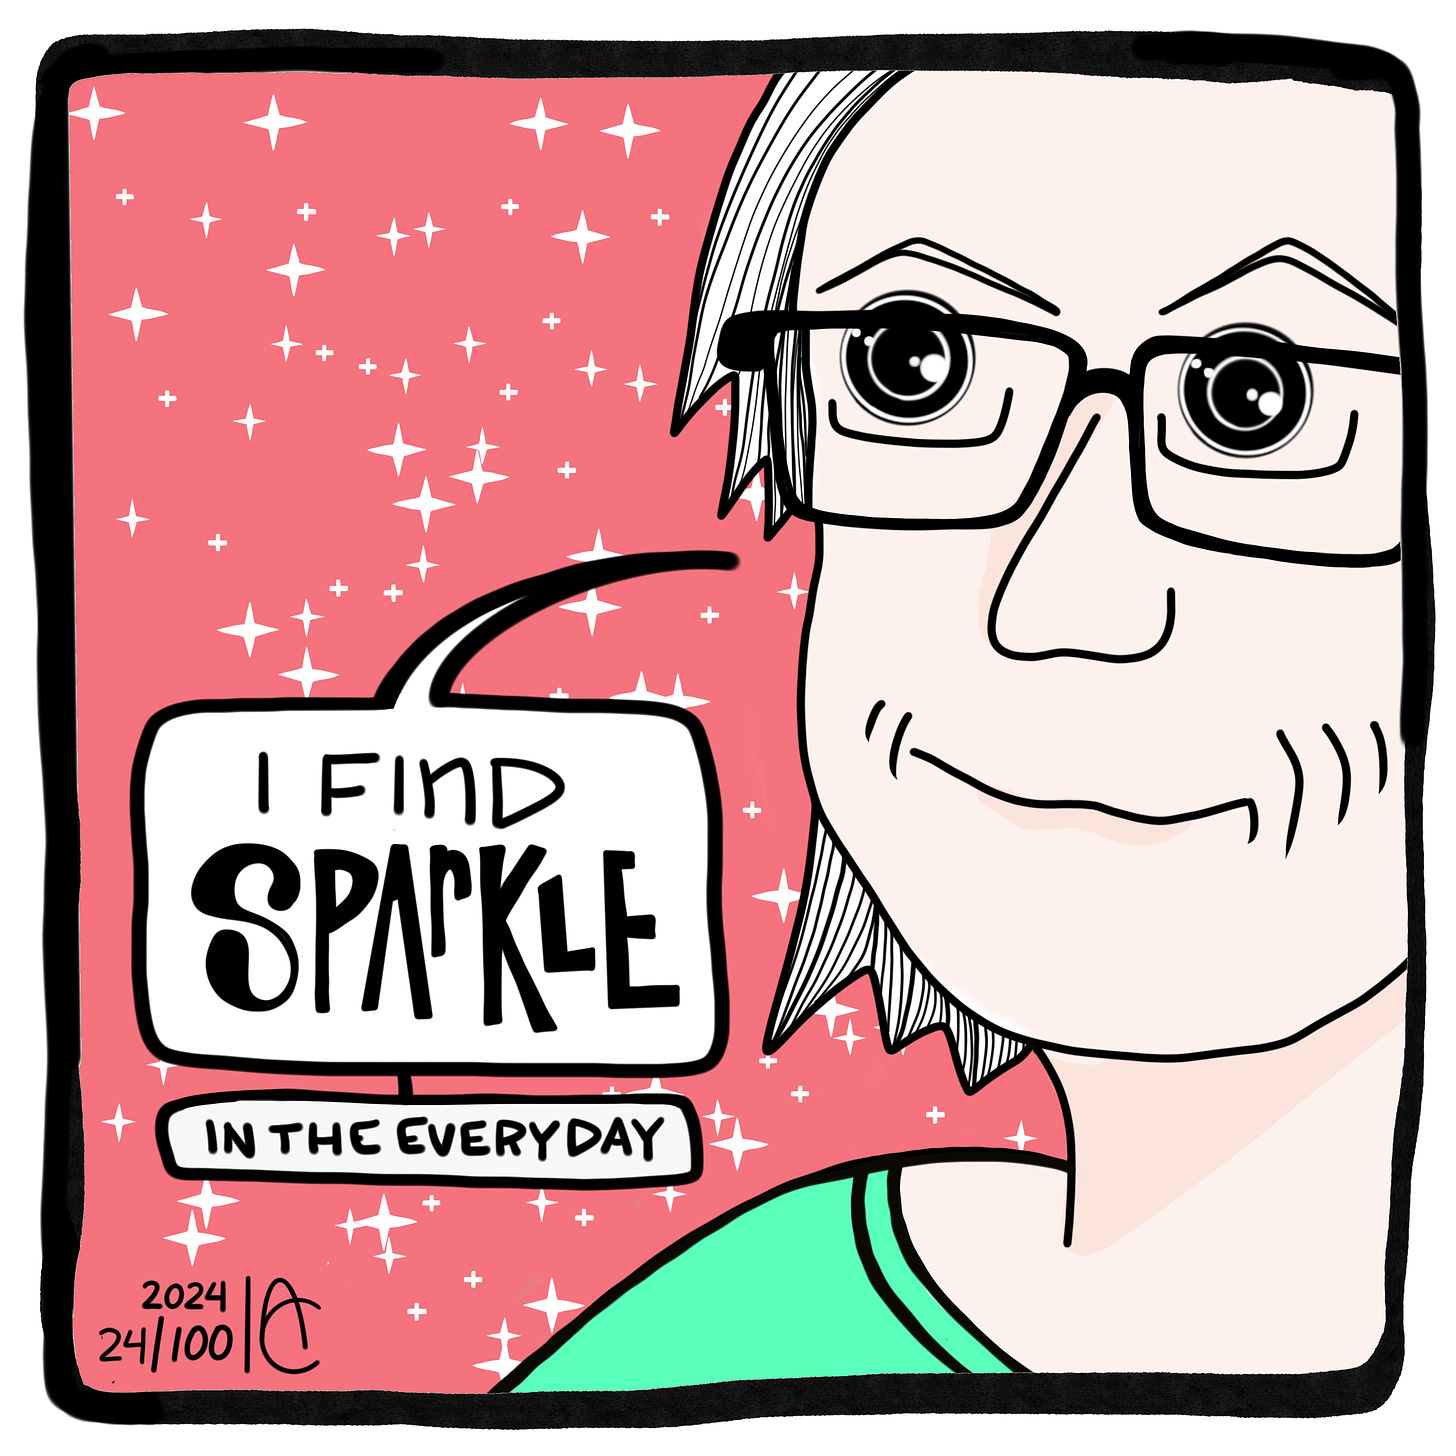 24/100:  I find sparkle in the everyday. 